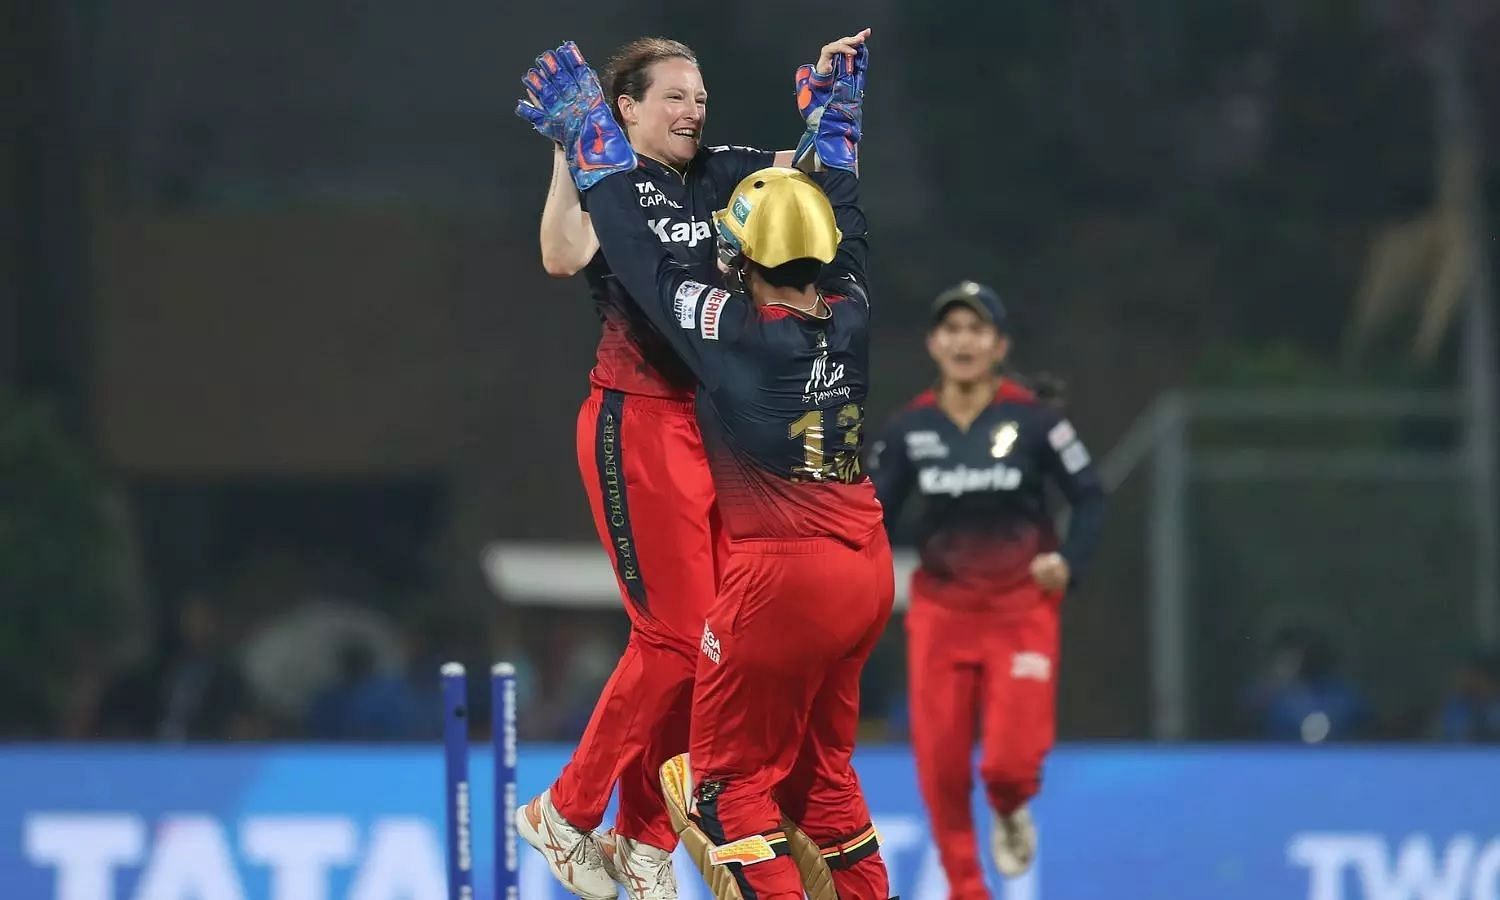 Megan Schutt was one of the players released by RCB. [P/C: wplt20.com]